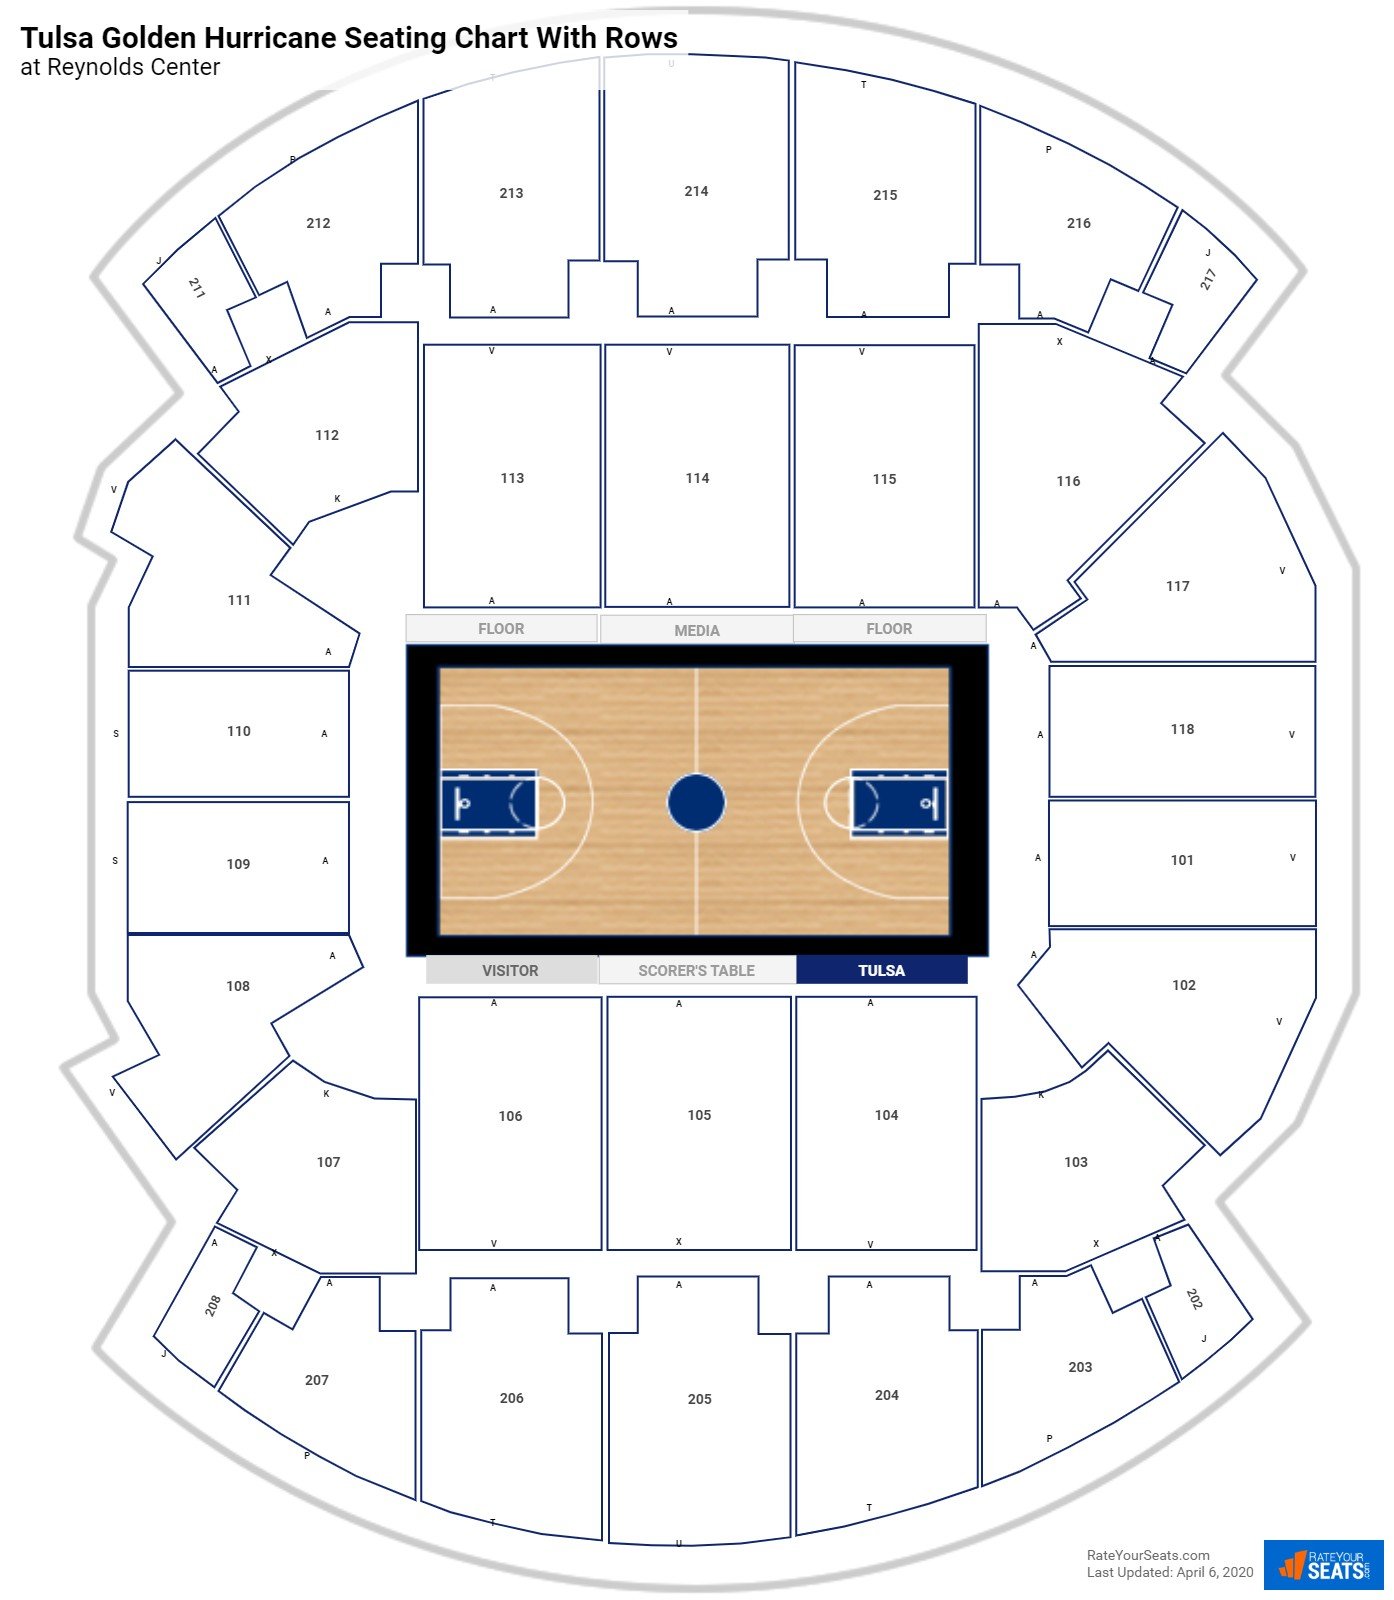 Reynolds Center seating chart with row numbers